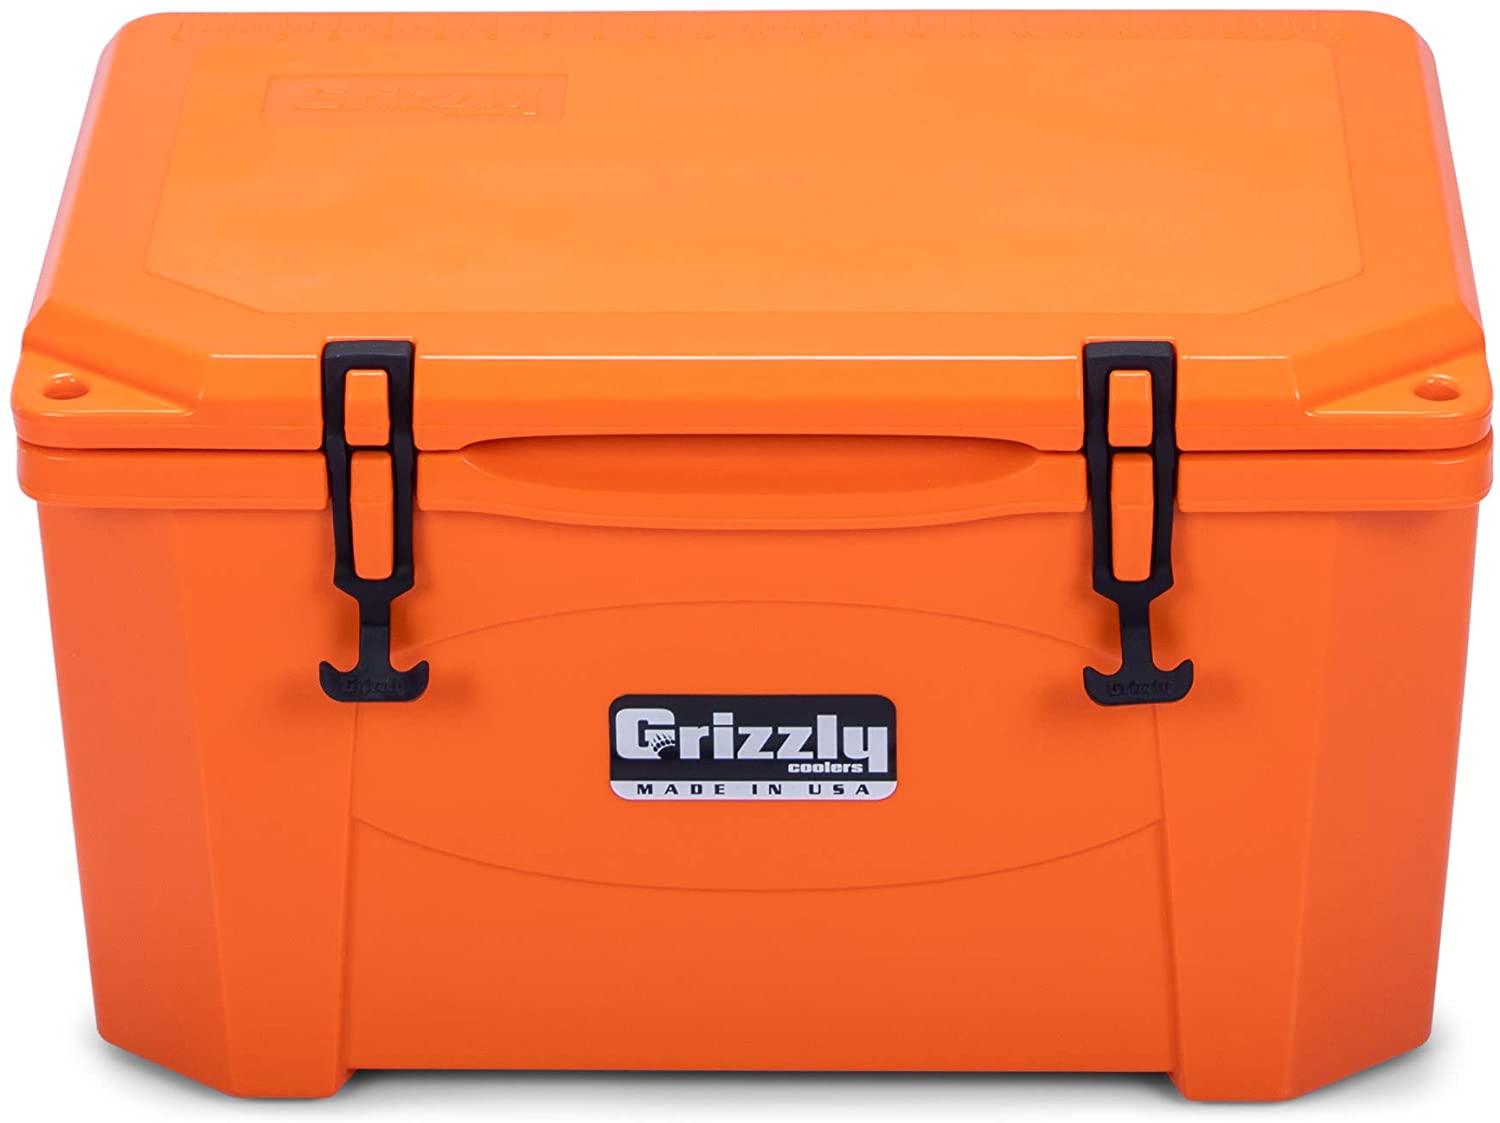 Grizzly_Bear_Proof_Camping_Cooler